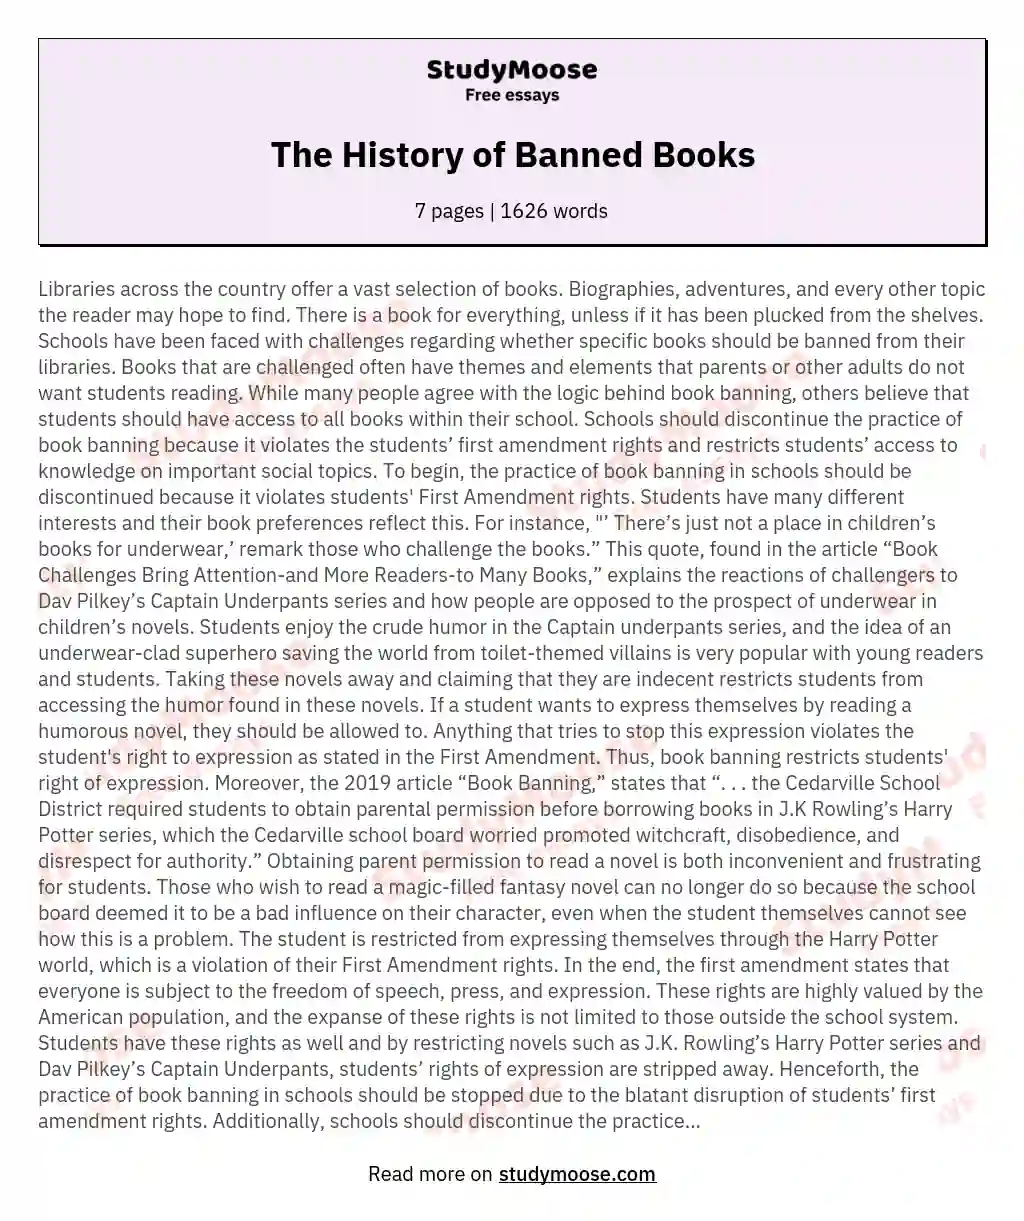 The History of Banned Books